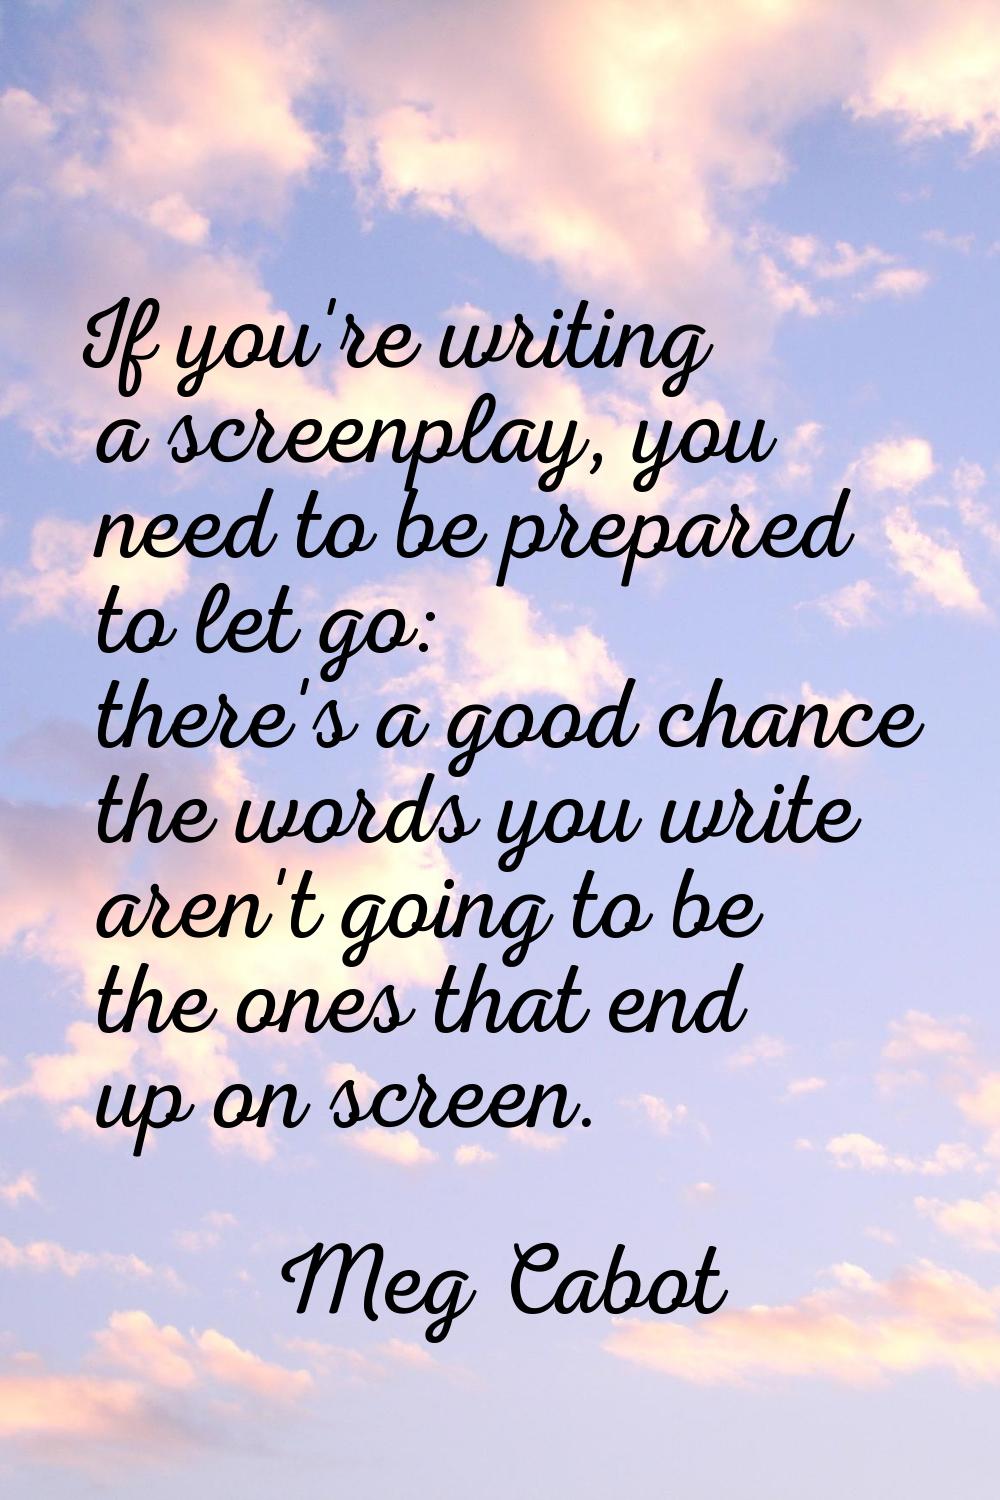 If you're writing a screenplay, you need to be prepared to let go: there's a good chance the words 